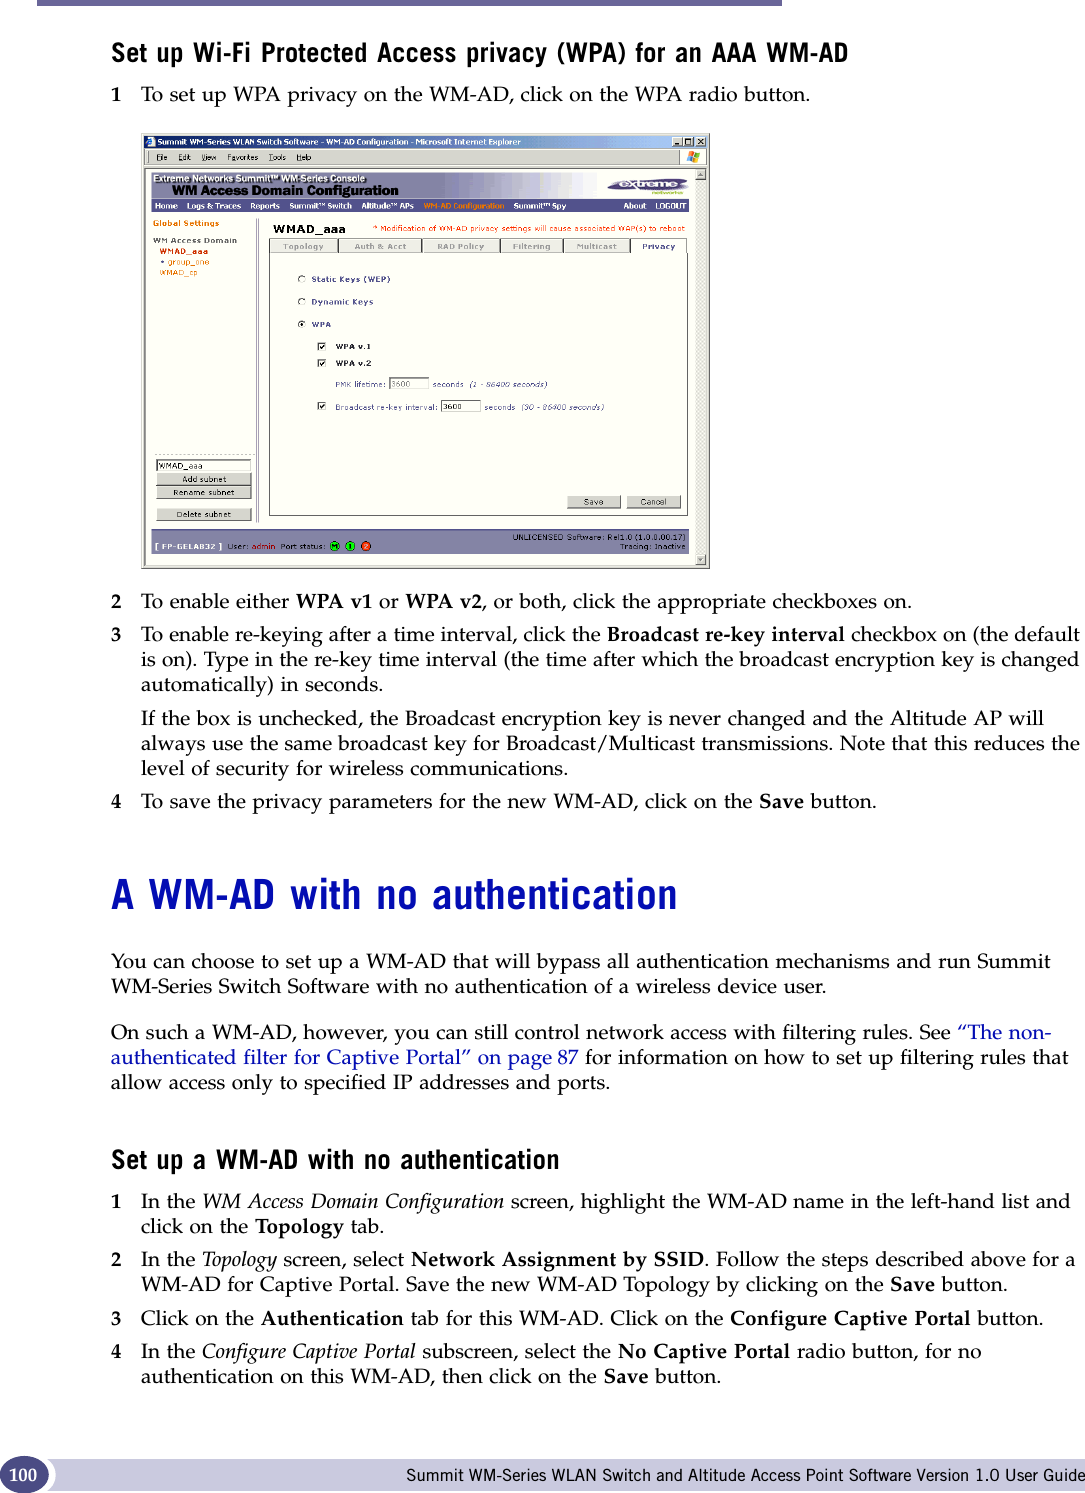 WM Access Domain Configuration Summit WM-Series WLAN Switch and Altitude Access Point Software Version 1.0 User Guide100Set up Wi-Fi Protected Access privacy (WPA) for an AAA WM-AD1To set up WPA privacy on the WM-AD, click on the WPA radio button.2To enable either WPA v1 or WPA v2, or both, click the appropriate checkboxes on.3To enable re-keying after a time interval, click the Broadcast re-key interval checkbox on (the default is on). Type in the re-key time interval (the time after which the broadcast encryption key is changed automatically) in seconds.If the box is unchecked, the Broadcast encryption key is never changed and the Altitude AP will always use the same broadcast key for Broadcast/Multicast transmissions. Note that this reduces the level of security for wireless communications.4To save the privacy parameters for the new WM-AD, click on the Save button.A WM-AD with no authenticationYou can choose to set up a WM-AD that will bypass all authentication mechanisms and run Summit WM-Series Switch Software with no authentication of a wireless device user. On such a WM-AD, however, you can still control network access with filtering rules. See “The non-authenticated filter for Captive Portal” on page 87 for information on how to set up filtering rules that allow access only to specified IP addresses and ports.Set up a WM-AD with no authentication1In the WM Access Domain Configuration screen, highlight the WM-AD name in the left-hand list and click on the Topo logy tab.2In the Top o logy  screen, select Network Assignment by SSID. Follow the steps described above for a WM-AD for Captive Portal. Save the new WM-AD Topology by clicking on the Save button. 3Click on the Authentication tab for this WM-AD. Click on the Configure Captive Portal button. 4In the Configure Captive Portal subscreen, select the No Captive Portal radio button, for no authentication on this WM-AD, then click on the Save button.